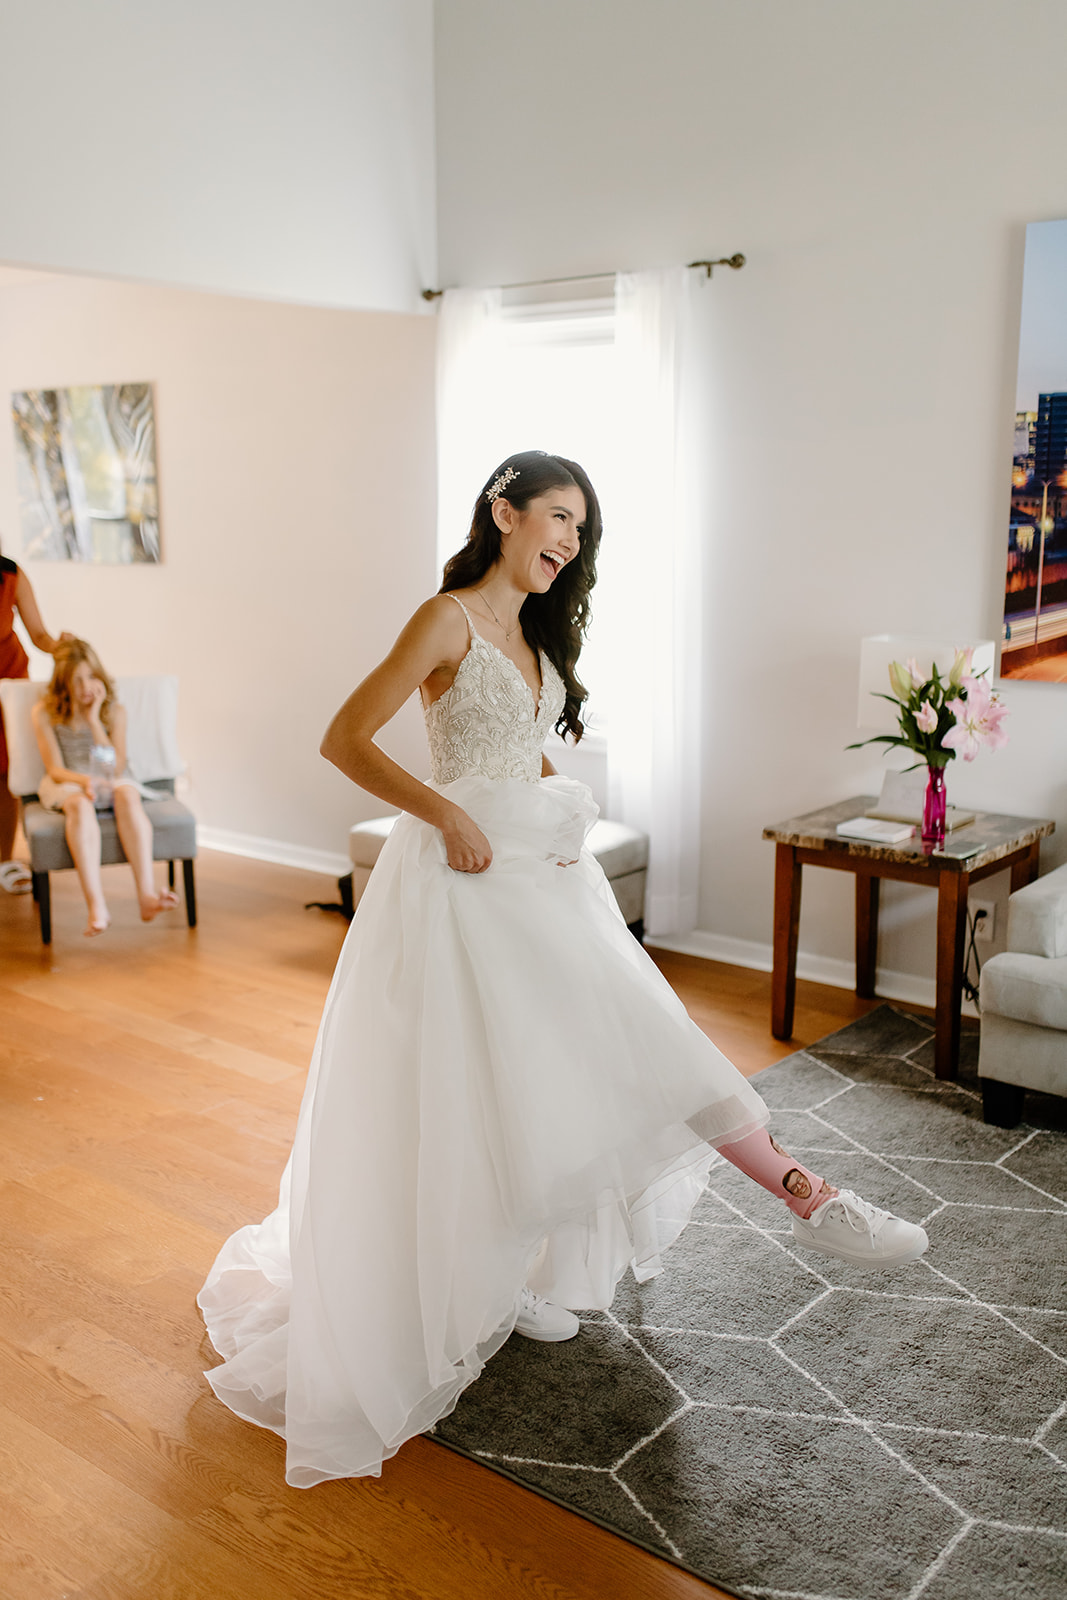 Bride smiles and shows off her socks in her wedding dress